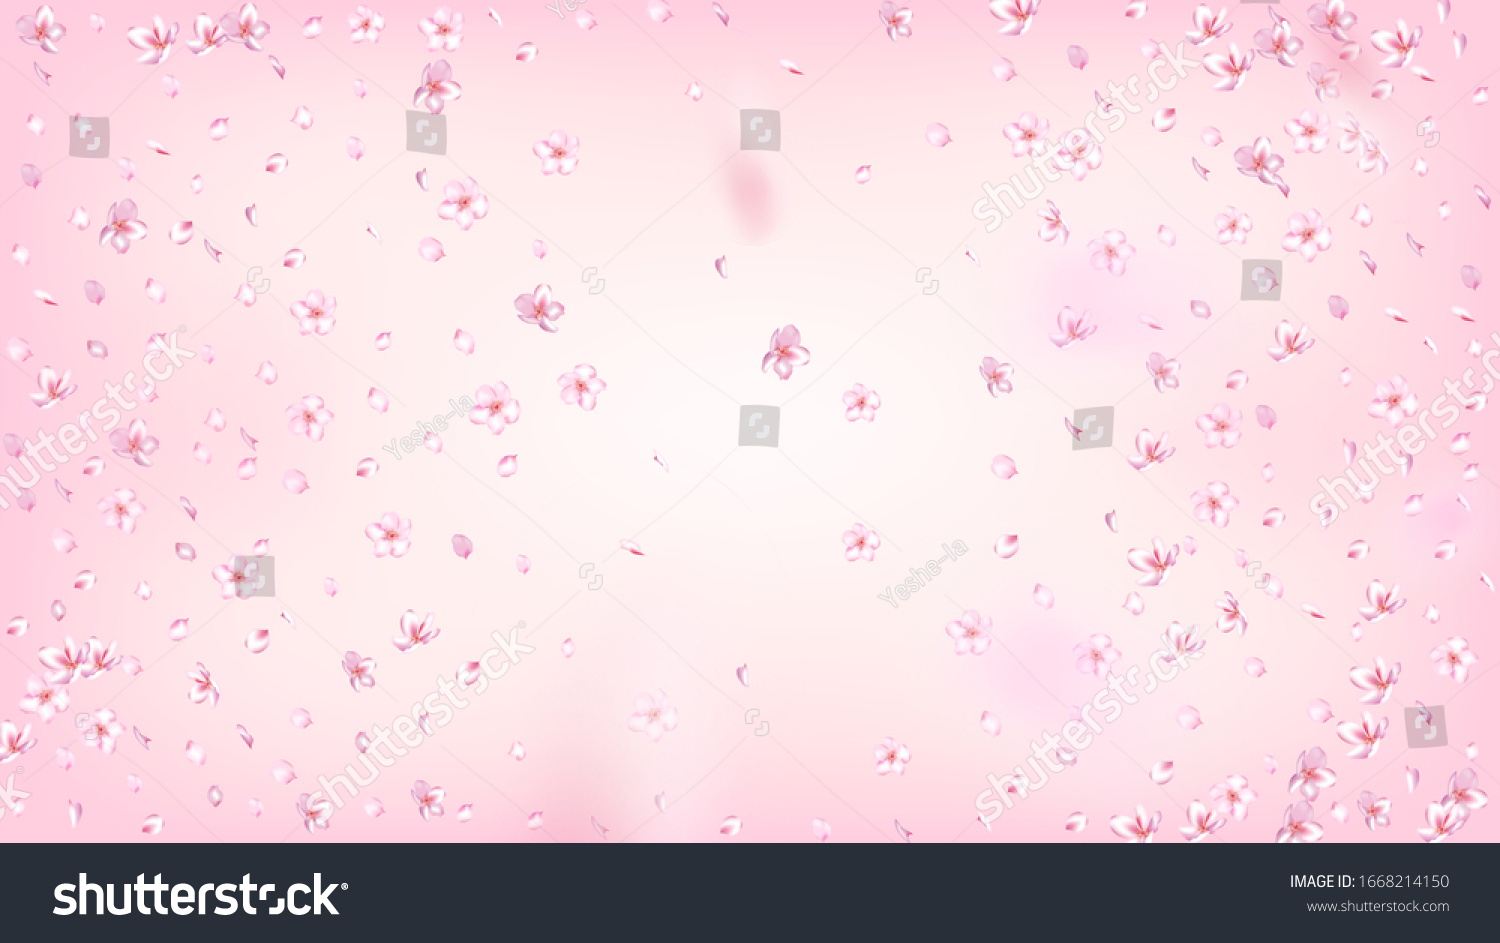 Nice Sakura Blossom Isolated Vector. Realistic Falling 3d Petals Wedding Frame. Japanese Funky Flowers Illustration. Valentine, Mother's Day Summer Nice Sakura Blossom Isolated on Rose #1668214150